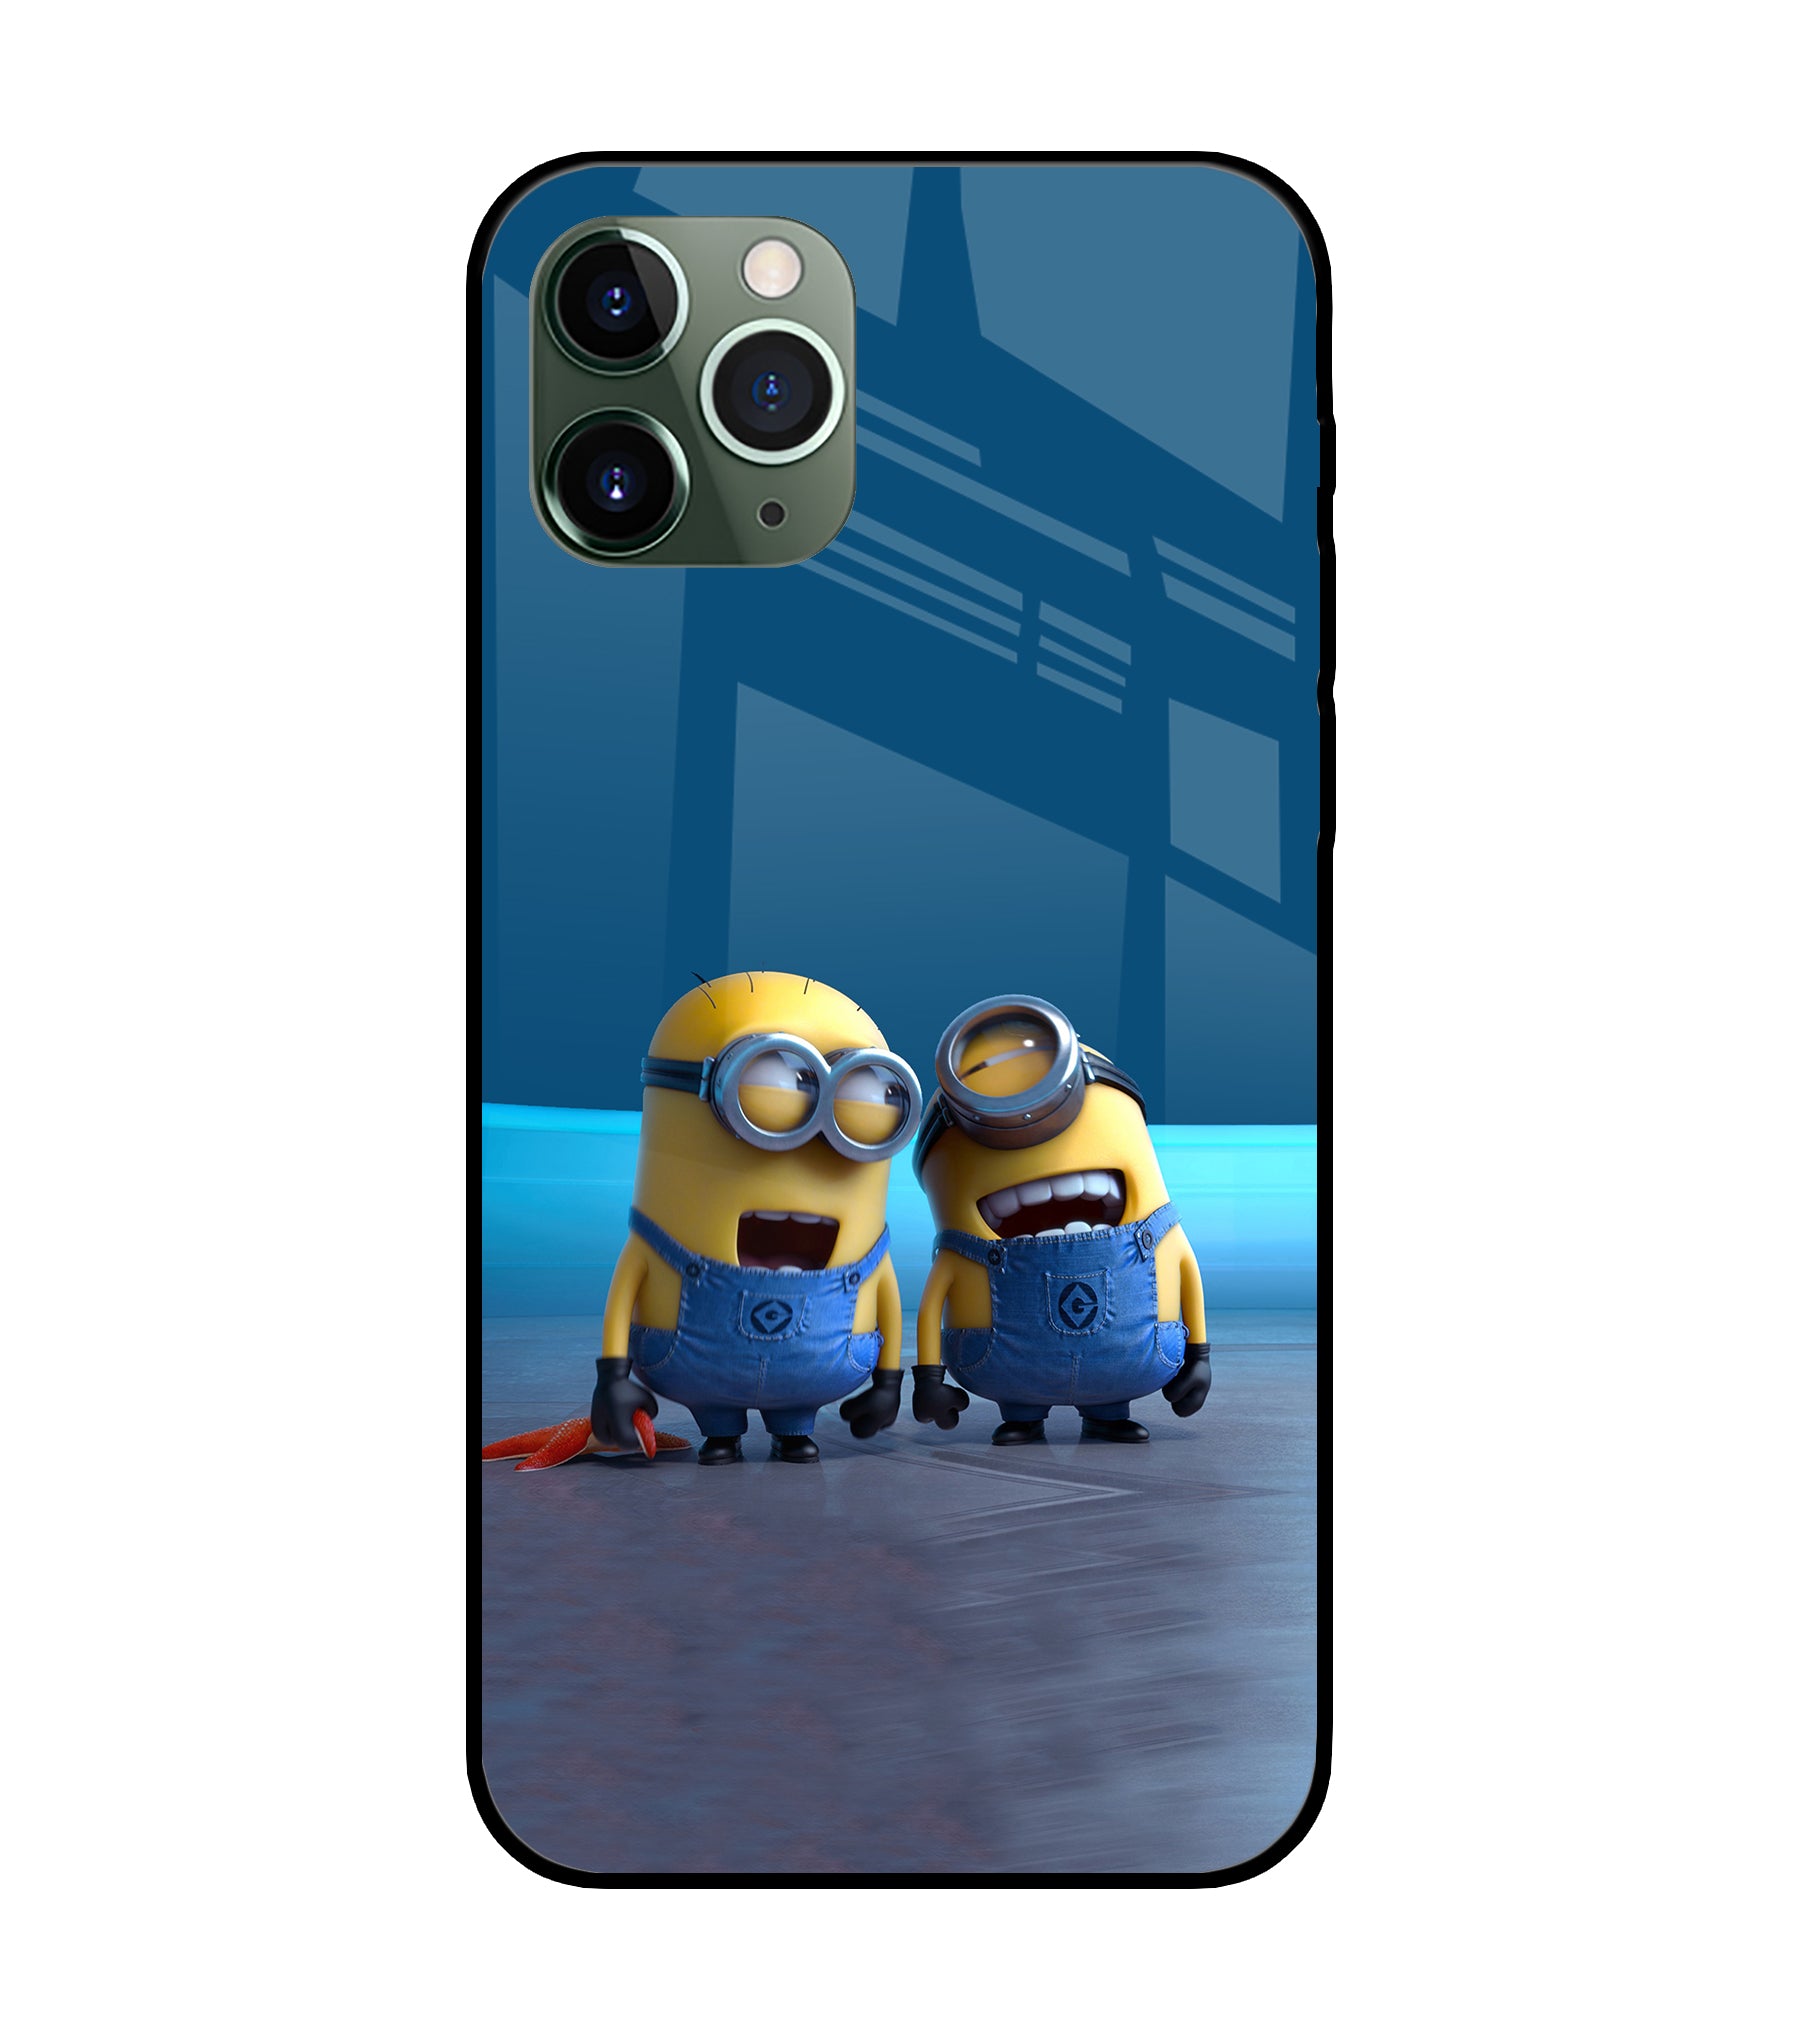 Minion Laughing iPhone 11 Pro Max Glass Cover